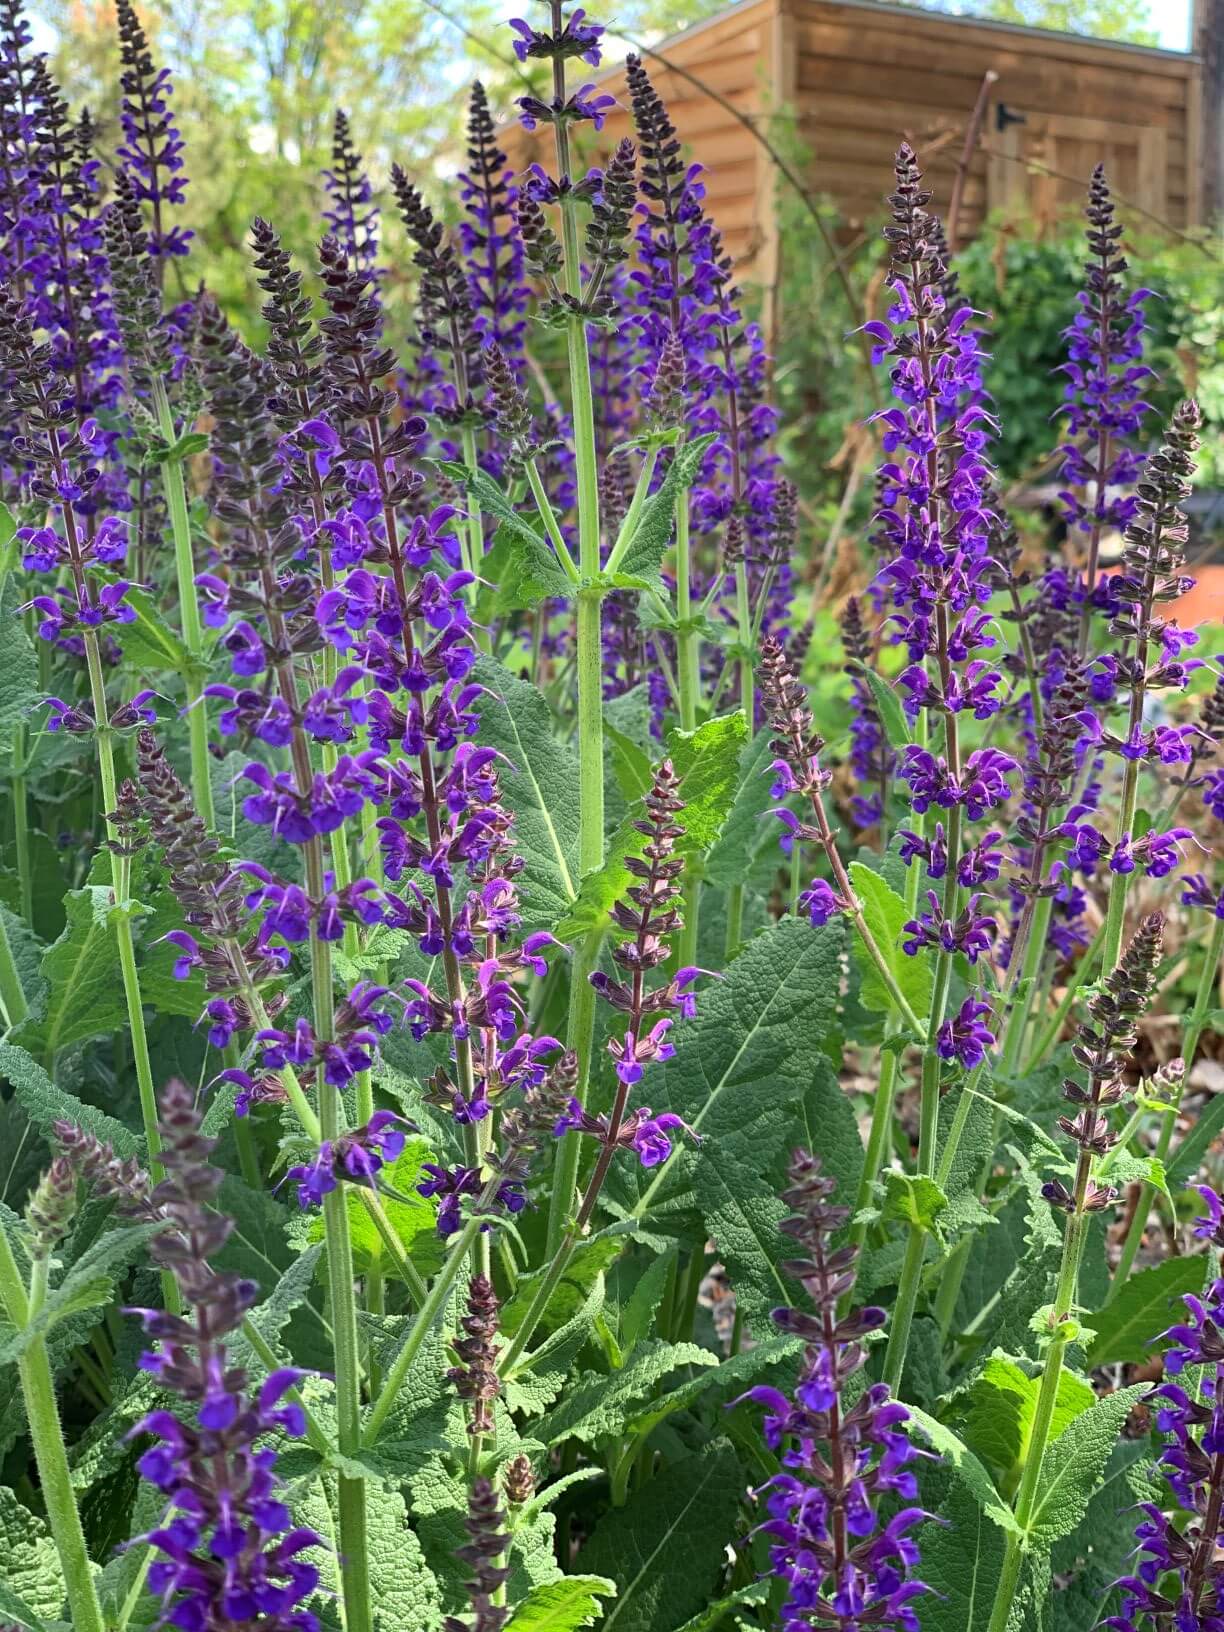 close up of a purple Salvia plant with a wooden shed in the background.